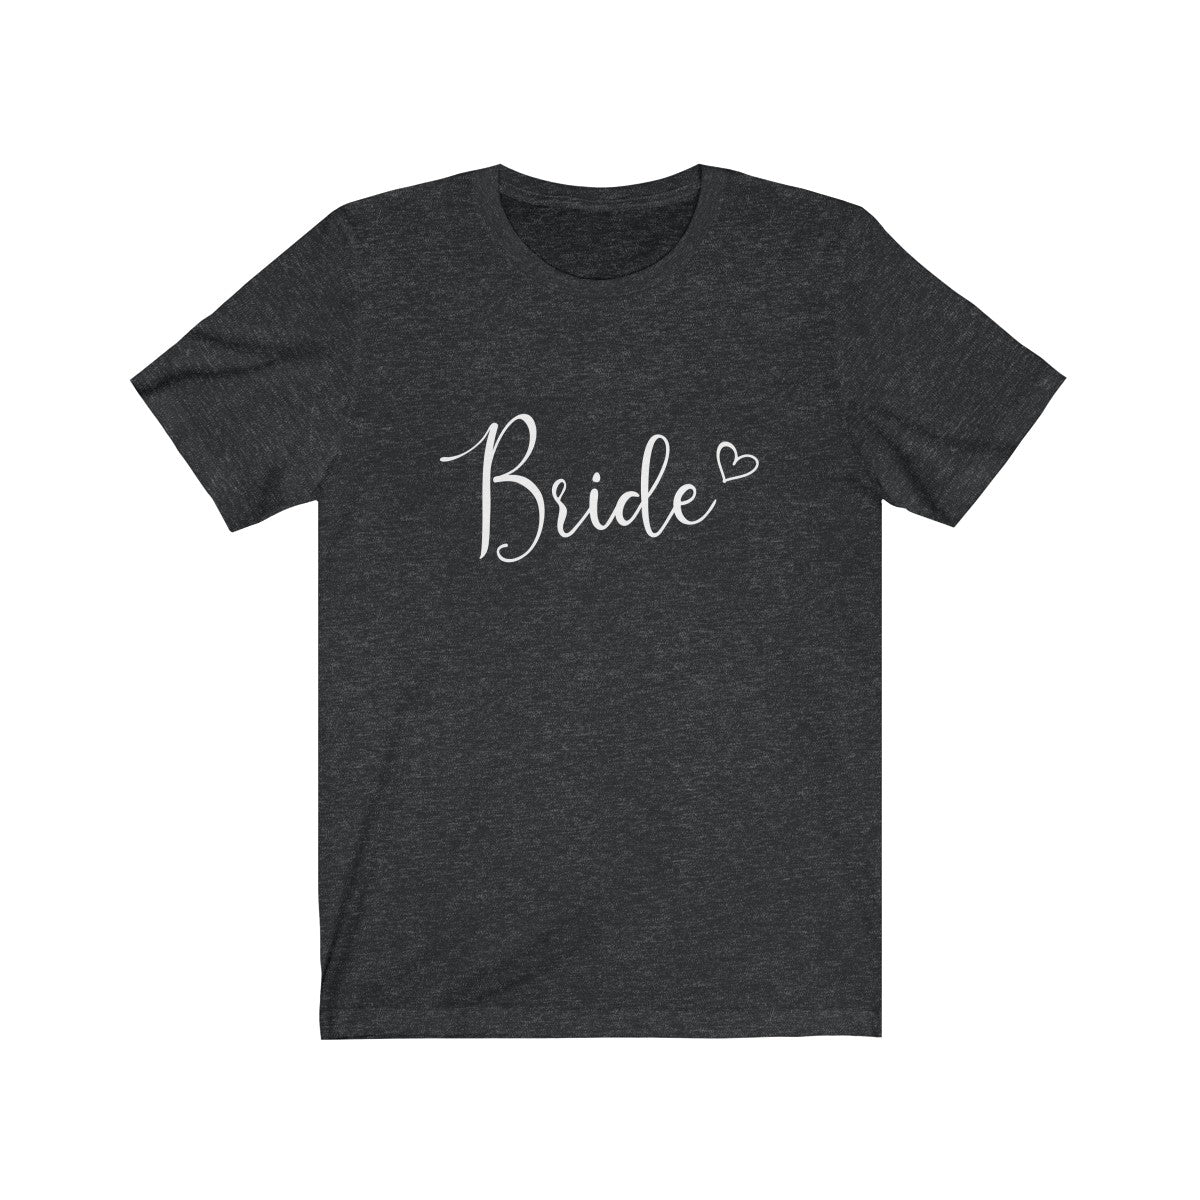 Tee Bride Heart white lettering - elrileygifts